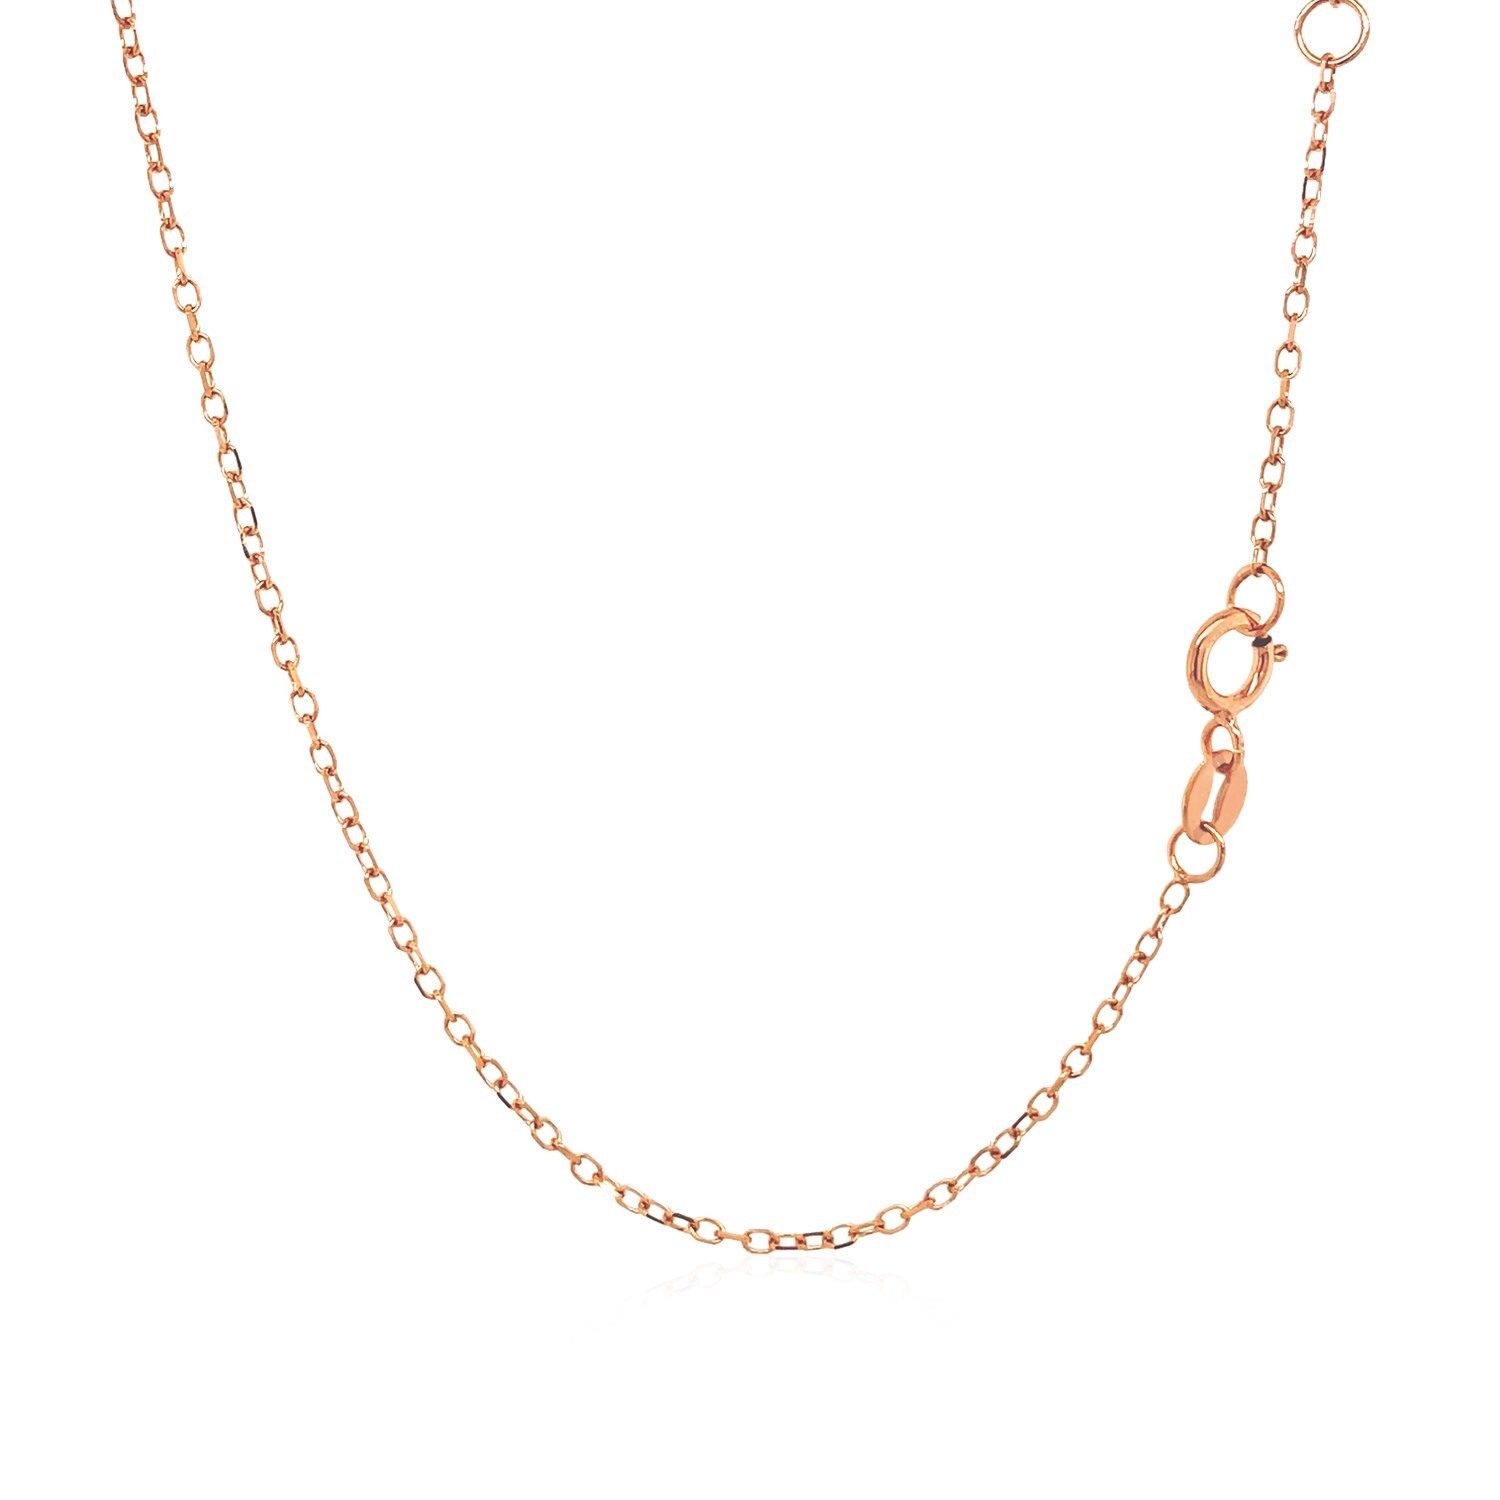 Jewellery - 14k Rose Gold 17 inch Necklace with Round White Topaz